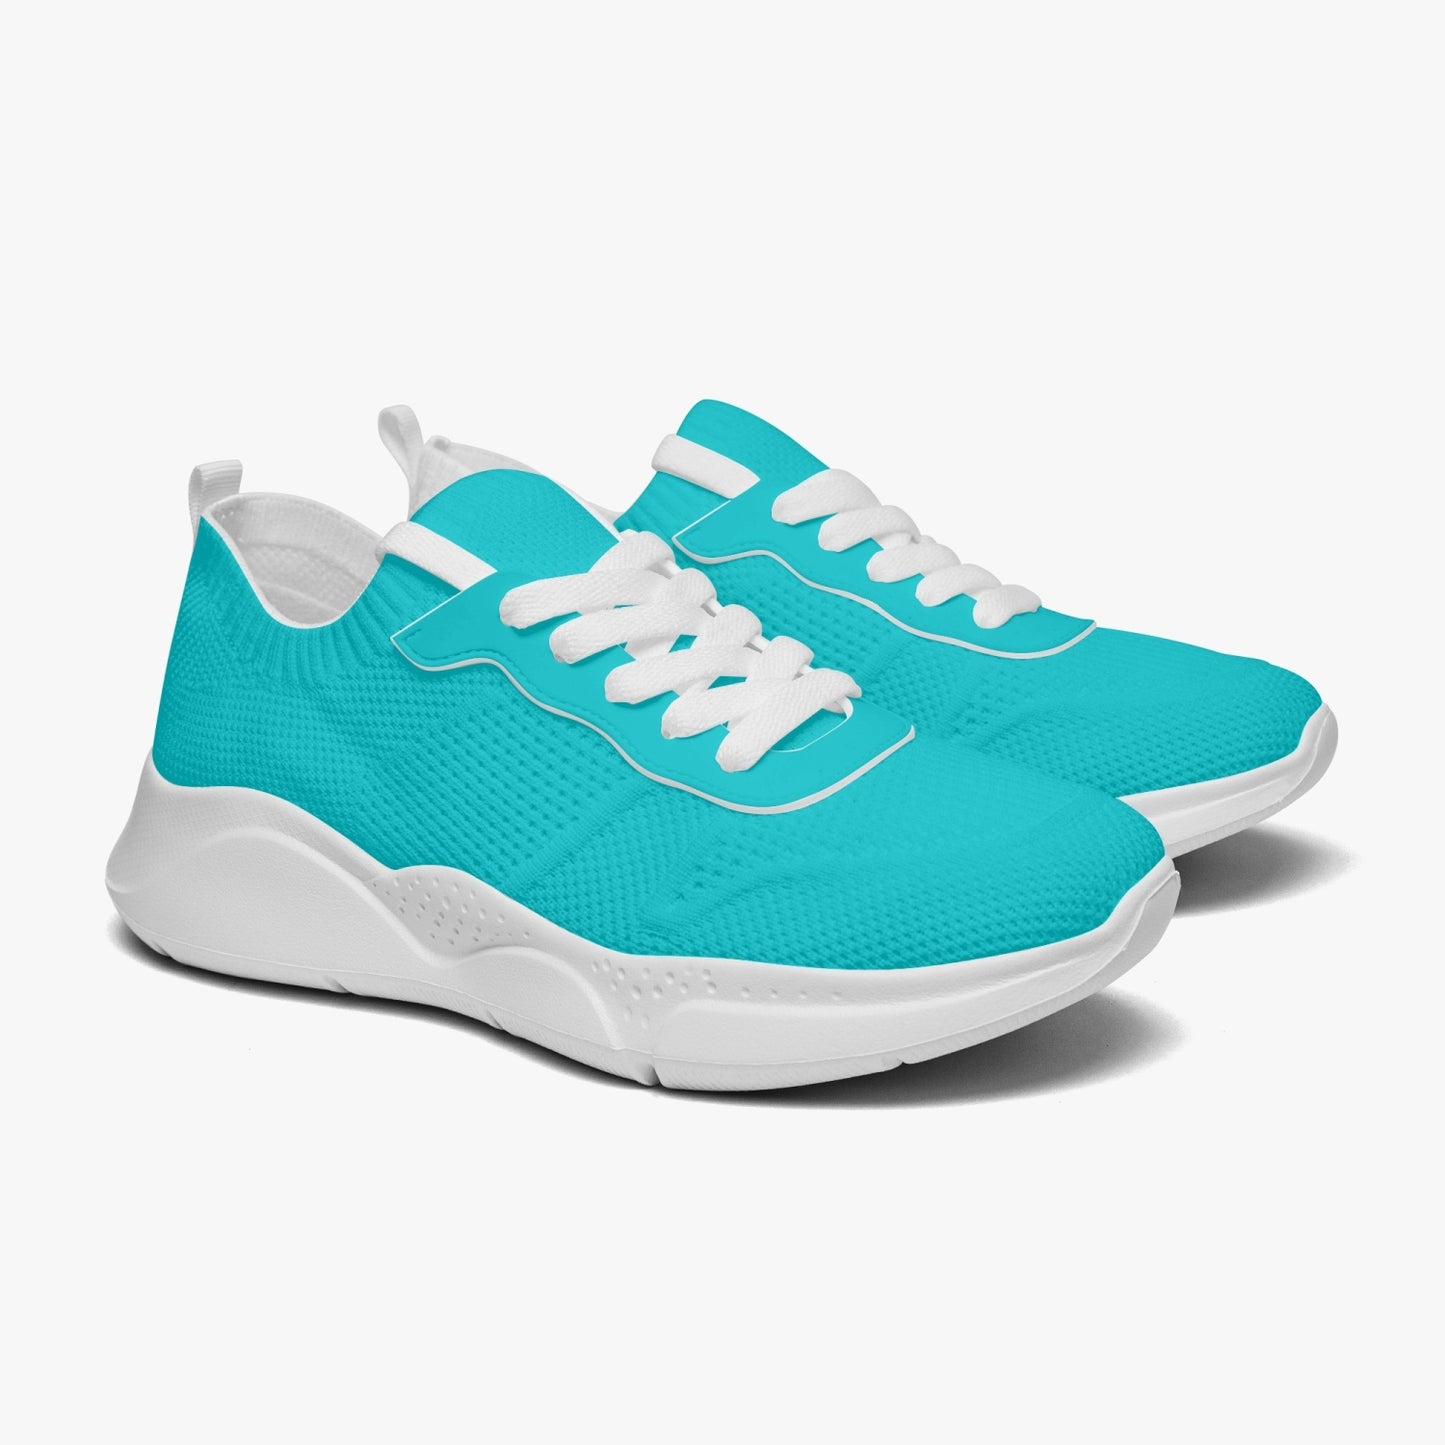 Kicxs Women's Running Shoes - In Various Colors